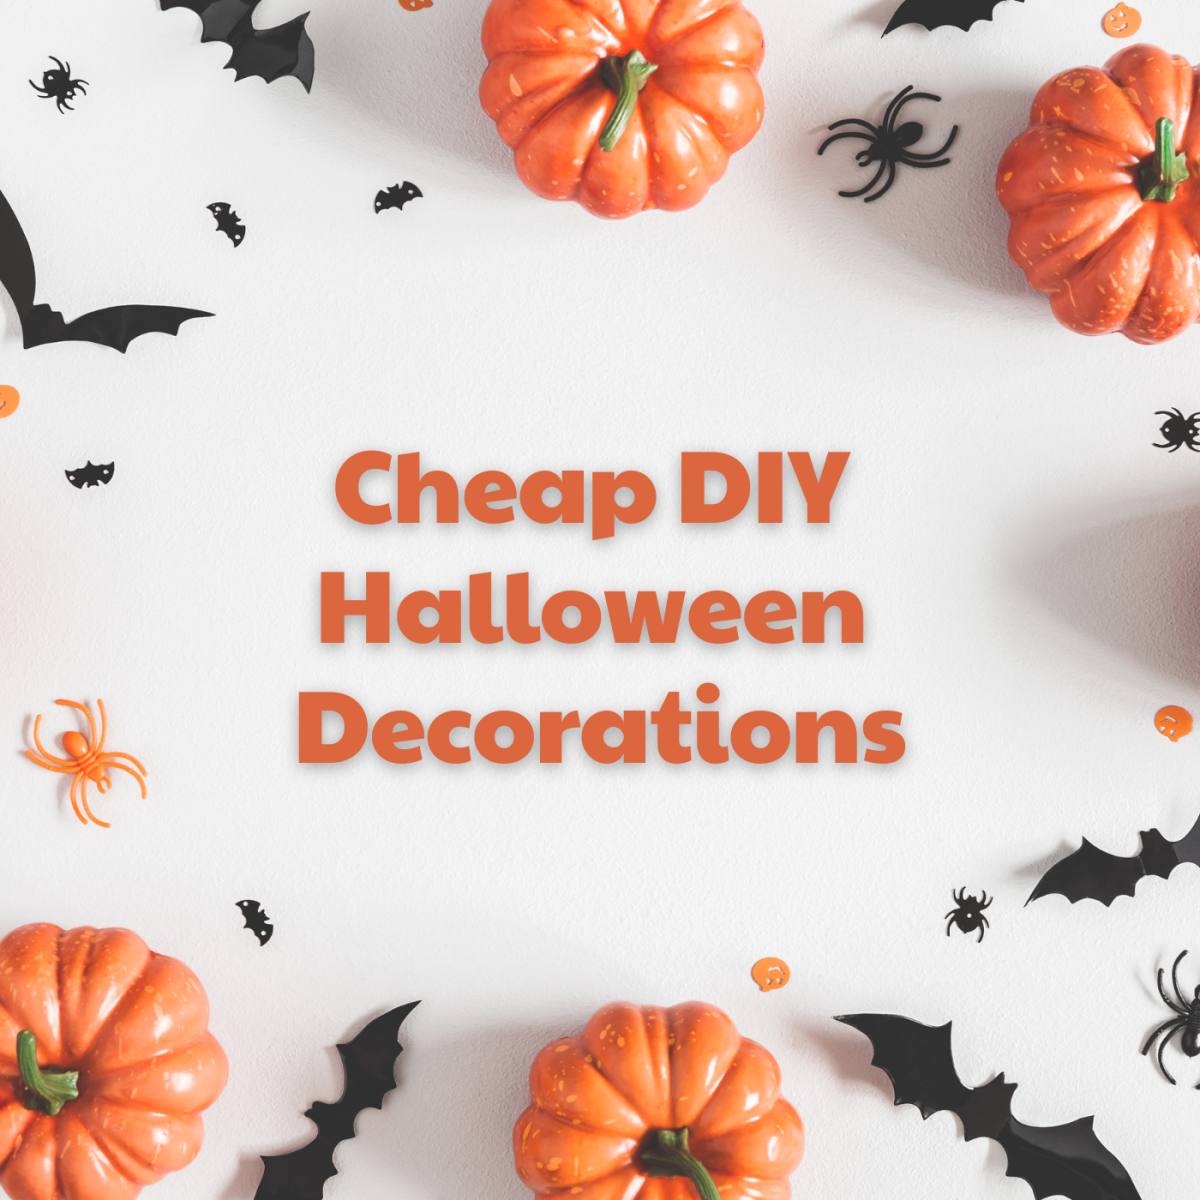 These cheap DIY decorations will make your home look great for Halloween. 